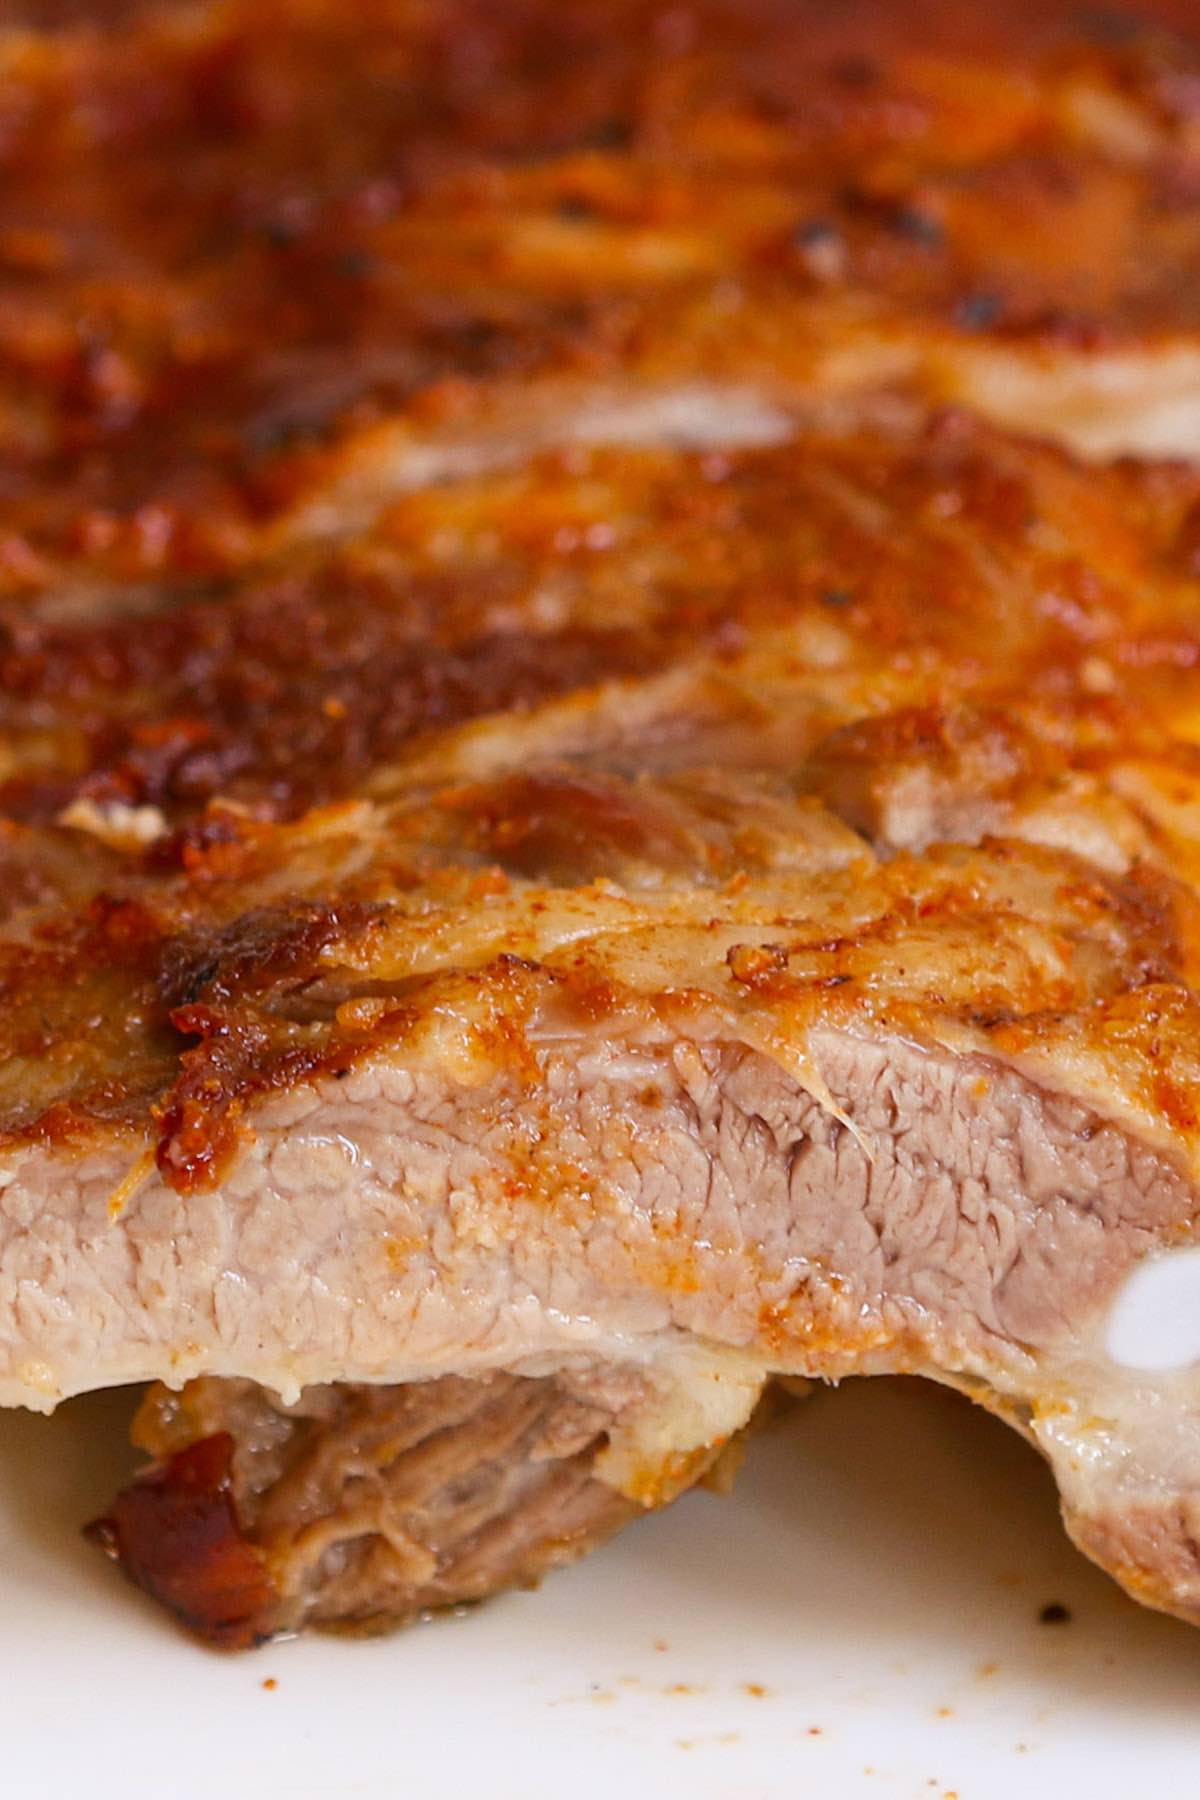 Closeup of an individual rib baked to perfection with juicy meat and a caramelized crust